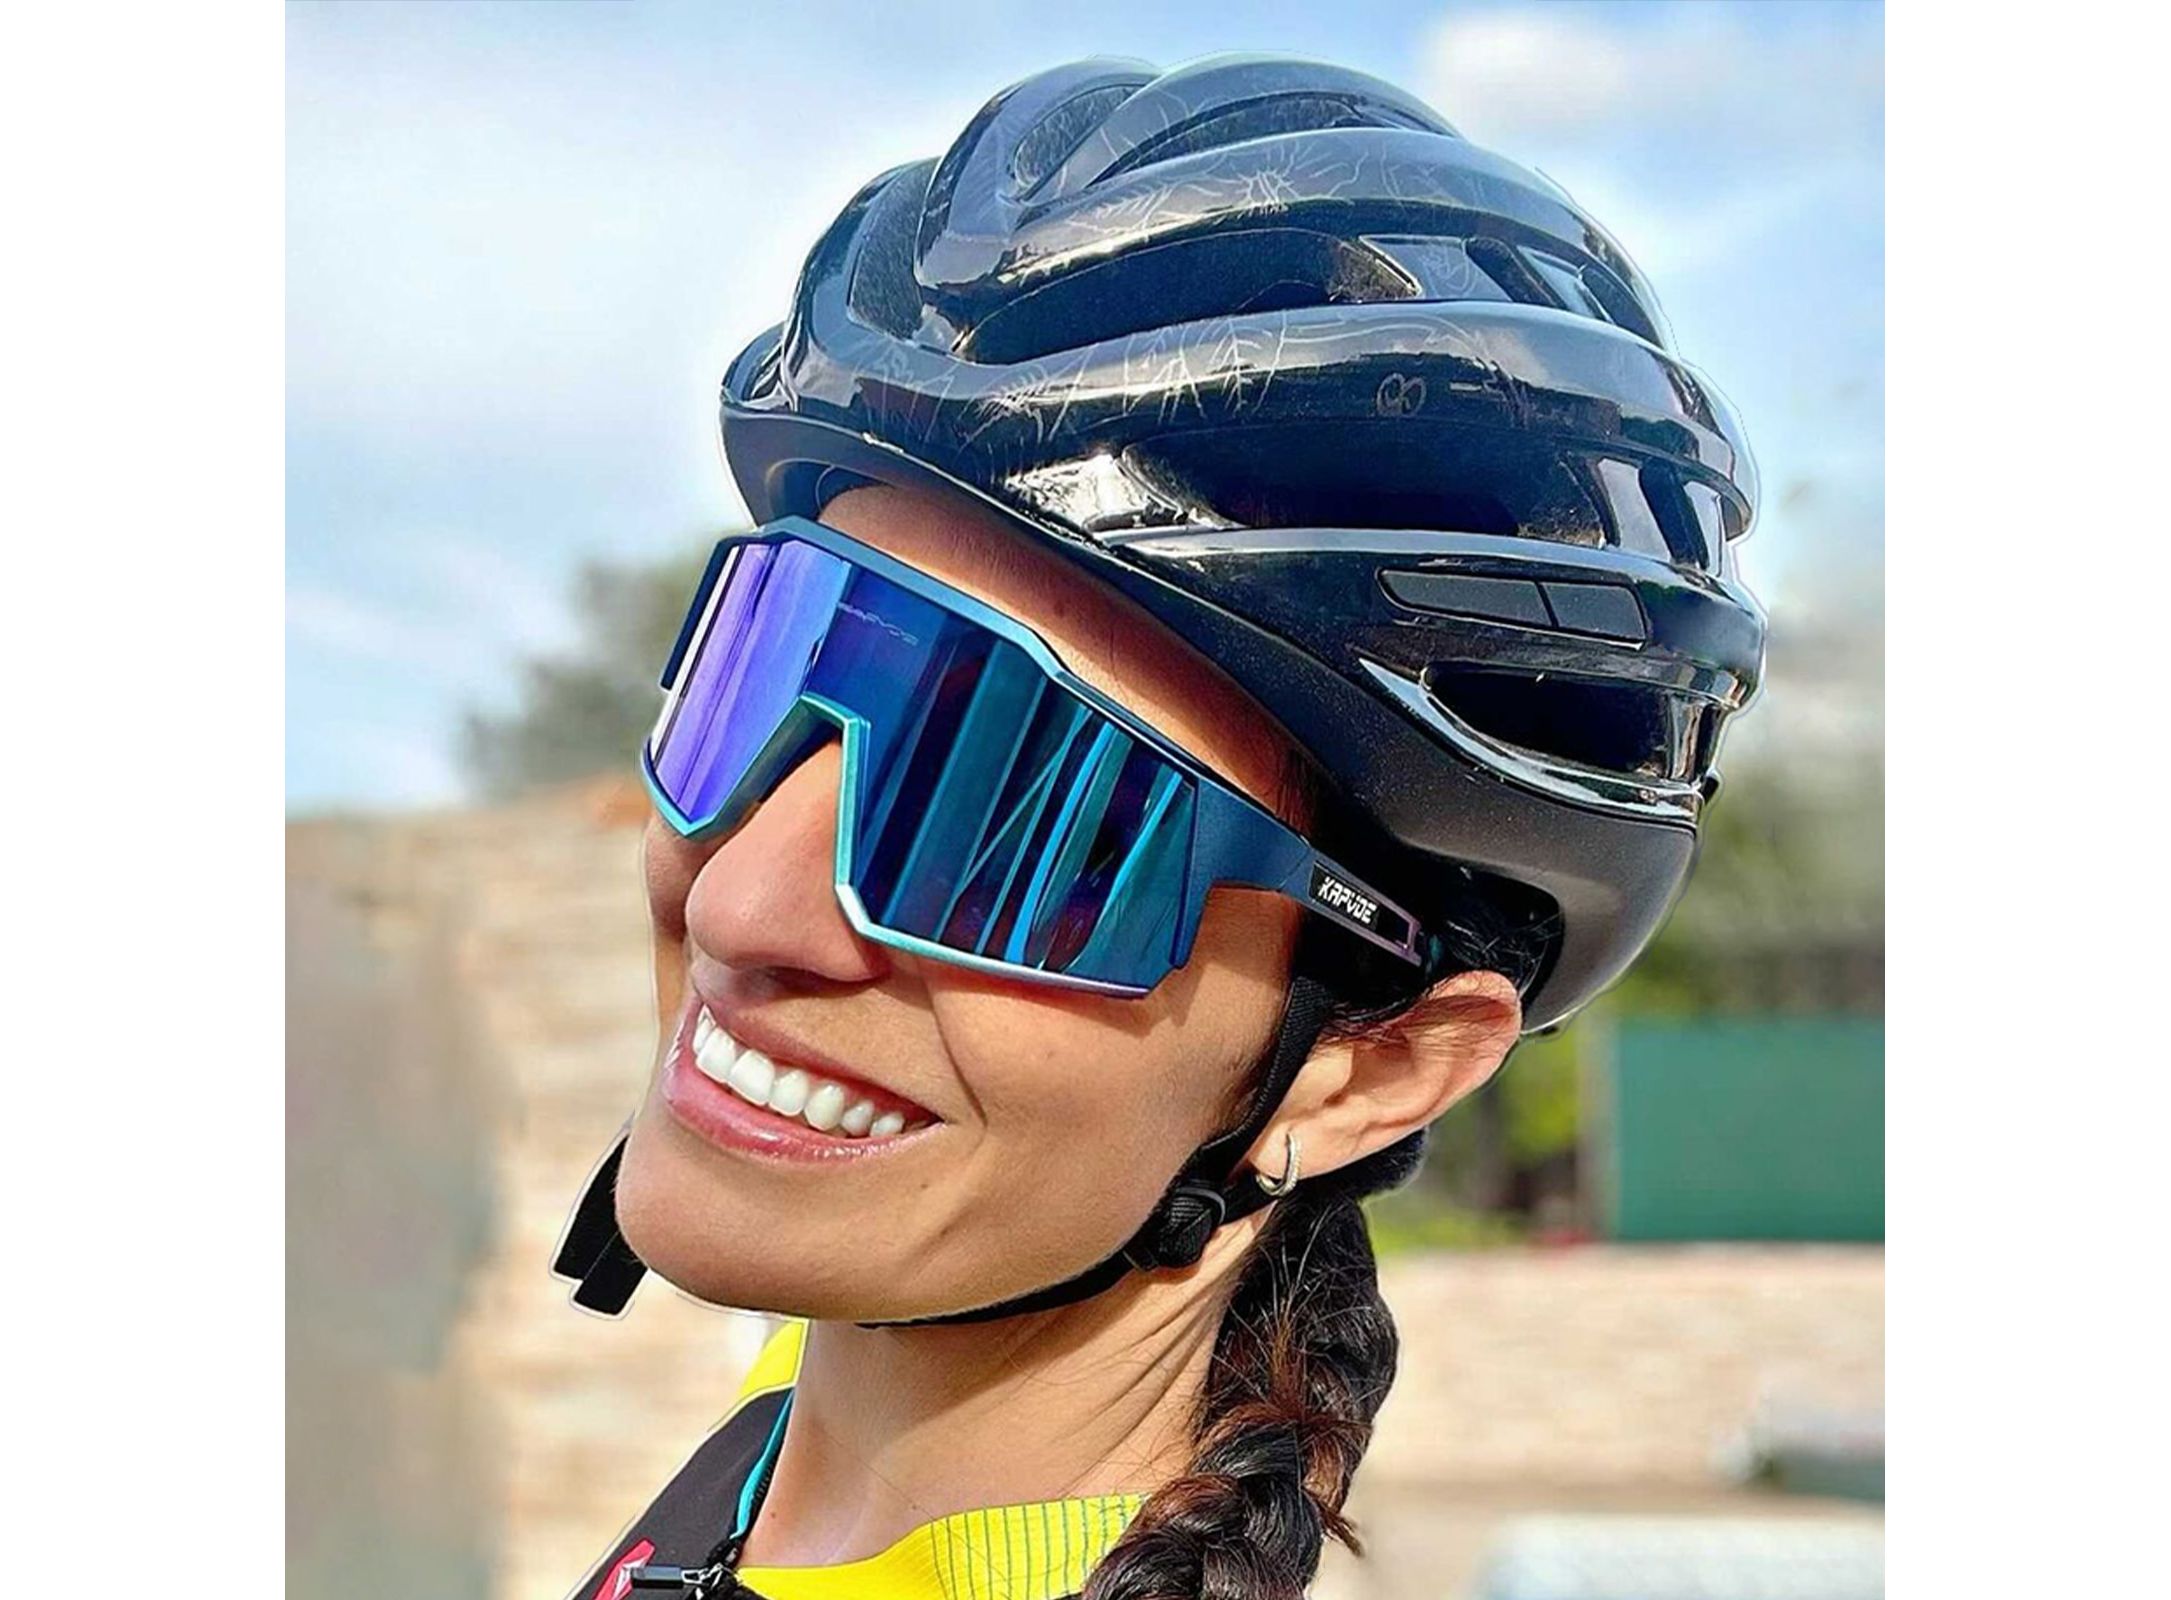 https://protechshop.co.uk/images/thumbnails/2171/1600/detailed/72/2021-Polarized-MTB-Men-Outdoor-Mountain-Cycling-Goggles-Bicycle-Eyewear-Road-Bike-Protection-Glasses-Windproof-Sport.jpg